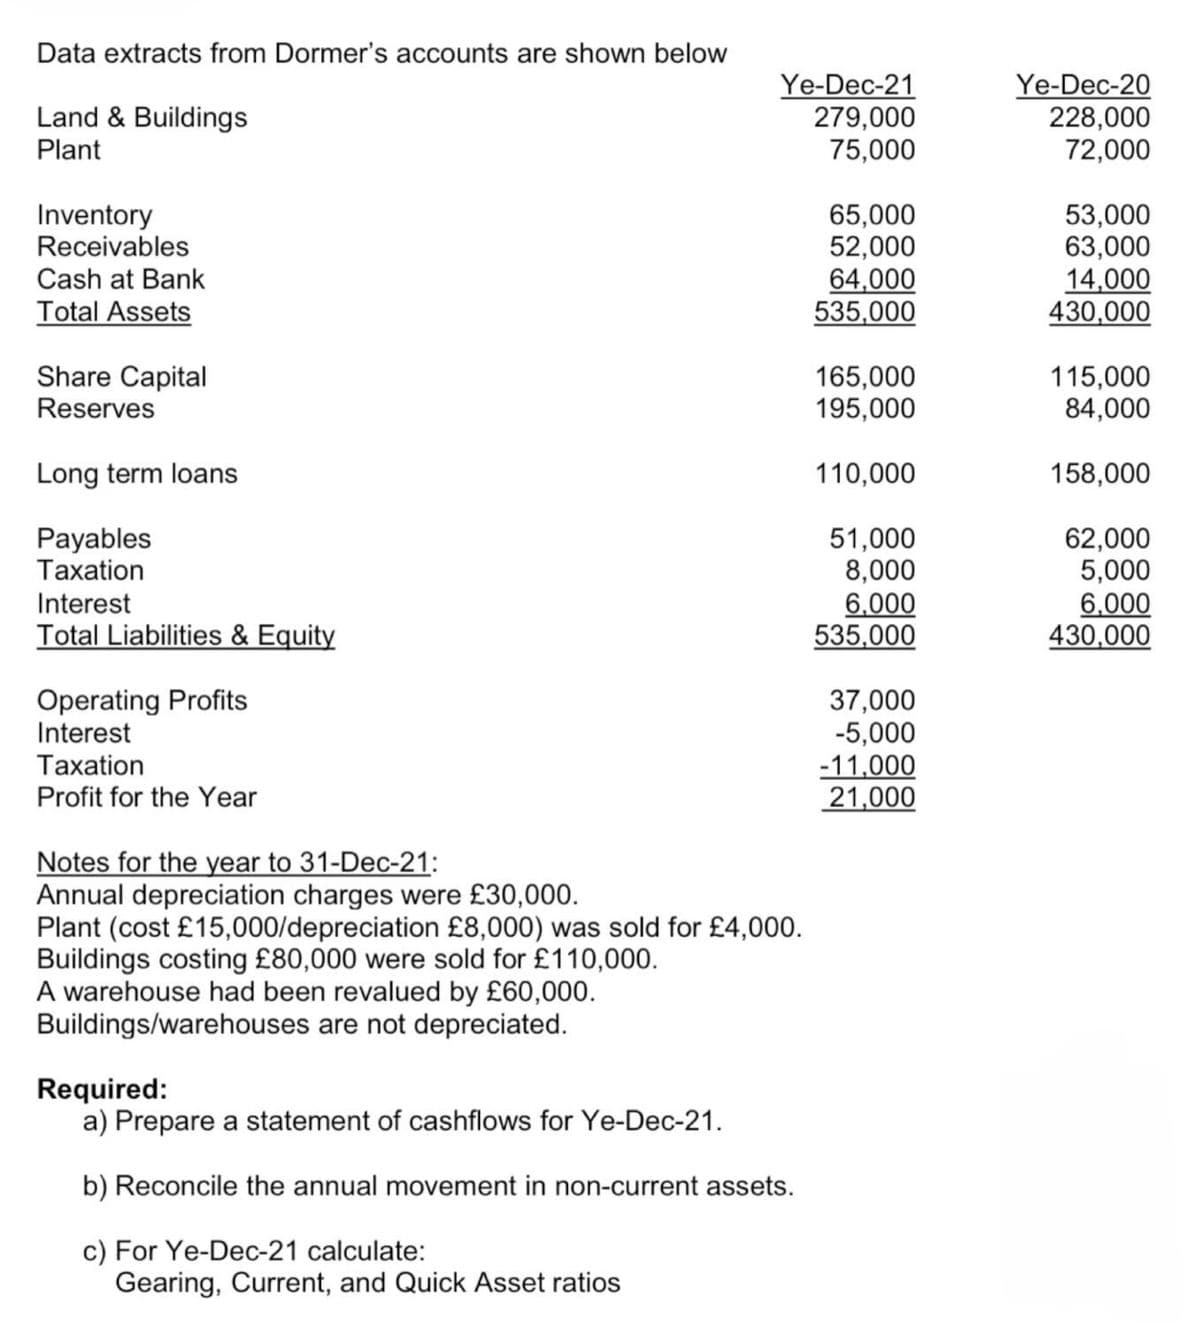 Data extracts from Dormer's accounts are shown below
Ye-Dec-21
Ye-Dec-20
Land & Buildings
279,000
228,000
Plant
75,000
72,000
Inventory
Receivables
Cash at Bank
Total Assets
Share Capital
Reserves
Long term loans
Payables
Taxation
Interest
Total Liabilities & Equity
Operating Profits
Interest
Taxation
65,000
53,000
52,000
63,000
64,000
14,000
535,000
430,000
165,000
115,000
195,000
84,000
110,000
158,000
51,000
62,000
8,000
5,000
6,000
6,000
535,000
430,000
37,000
-5,000
-11,000
21,000
Profit for the Year
Notes for the year to 31-Dec-21:
Annual depreciation charges were £30,000.
Plant (cost £15,000/depreciation £8,000) was sold for £4,000.
Buildings costing £80,000 were sold for £110,000.
A warehouse had been revalued by £60,000.
Buildings/warehouses are not depreciated.
Required:
a) Prepare a statement of cashflows for Ye-Dec-21.
b) Reconcile the annual movement in non-current assets.
c) For Ye-Dec-21 calculate:
Gearing, Current, and Quick Asset ratios